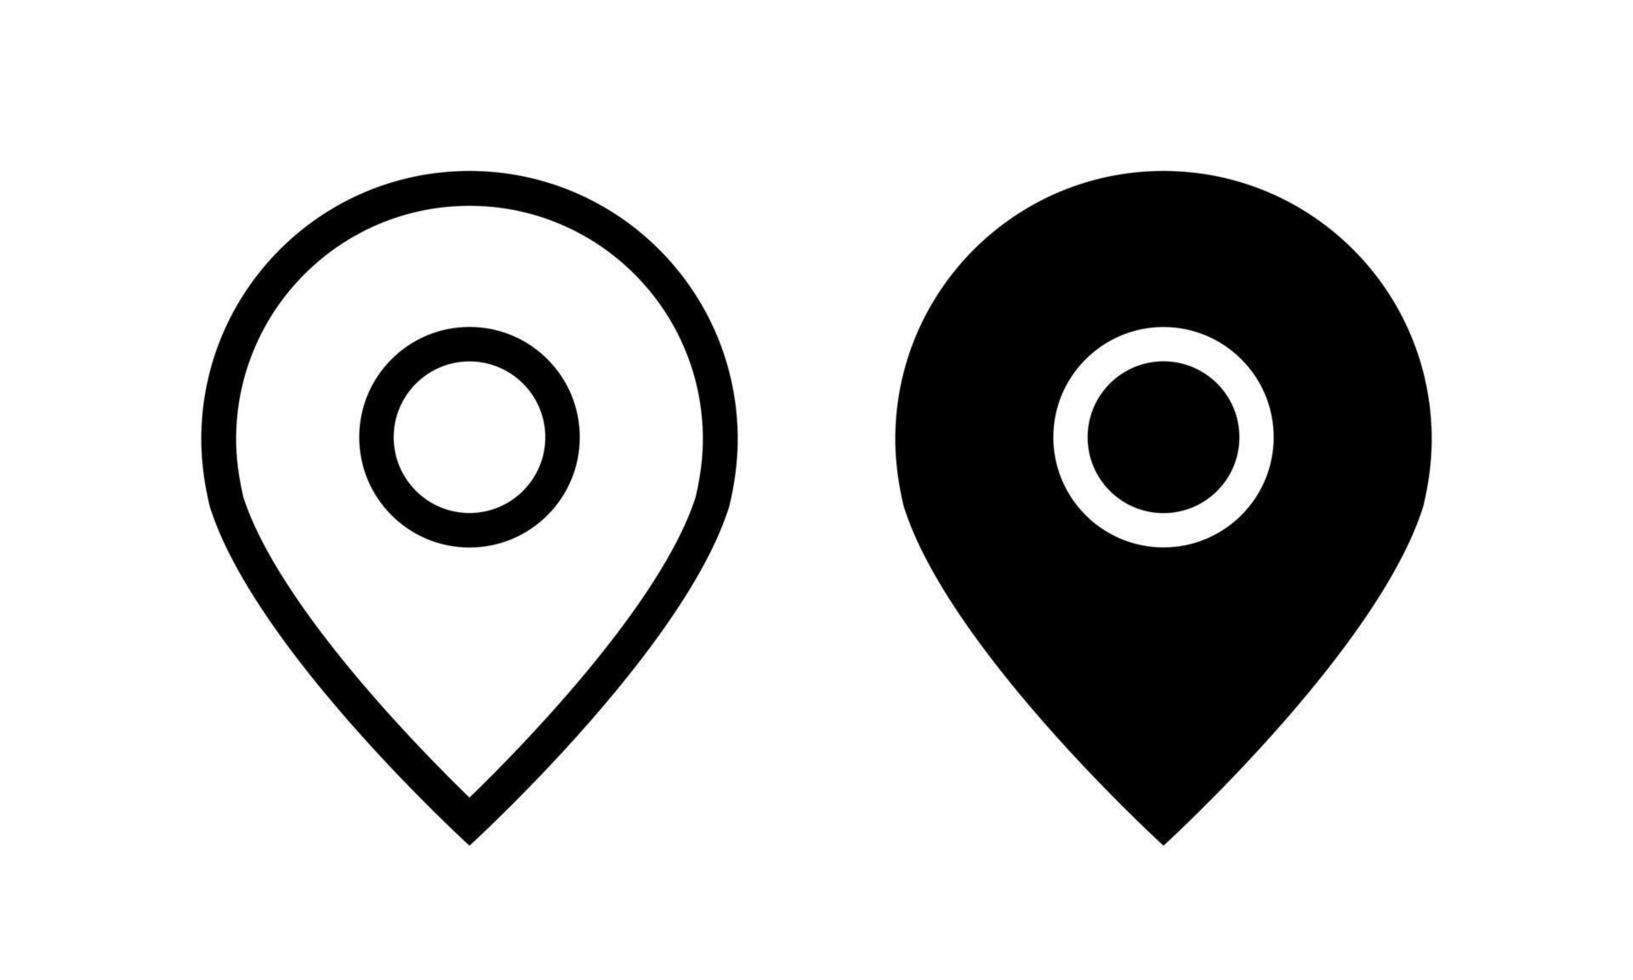 Map pin, location icon vector in clipart style